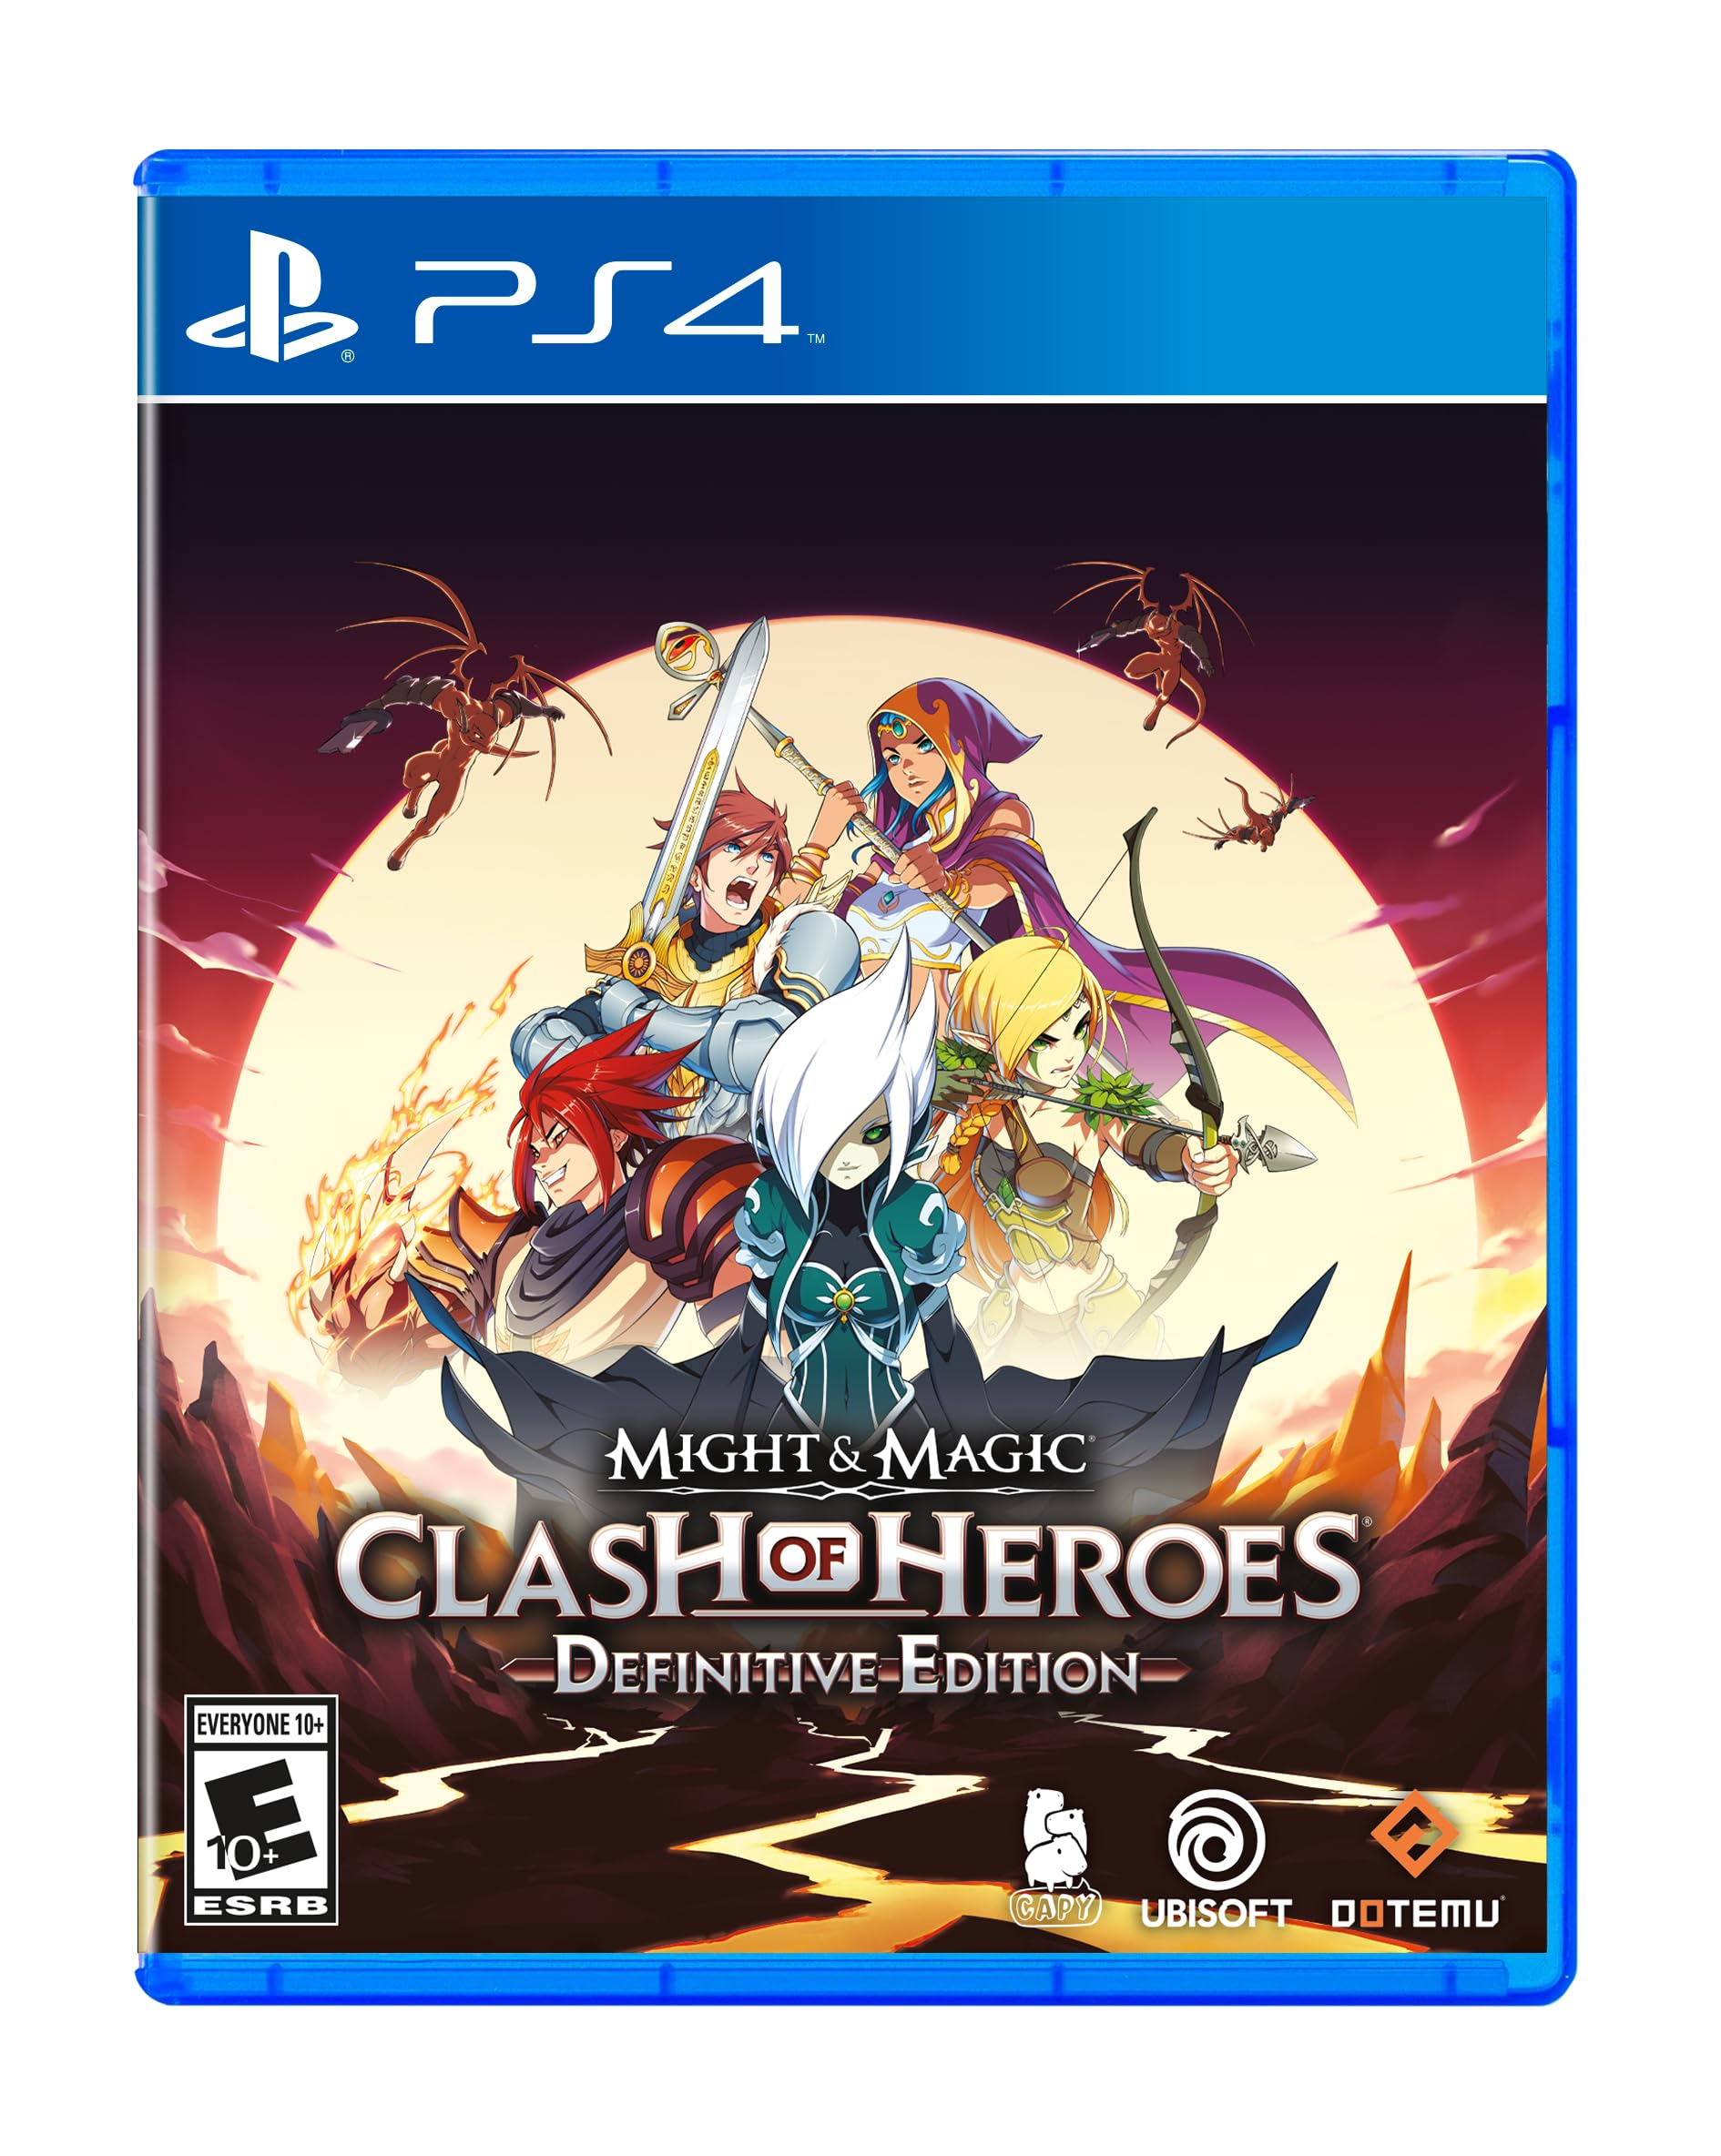 Might & Magic: Clash of Heroes: Definitive Edition - PlayStation 4